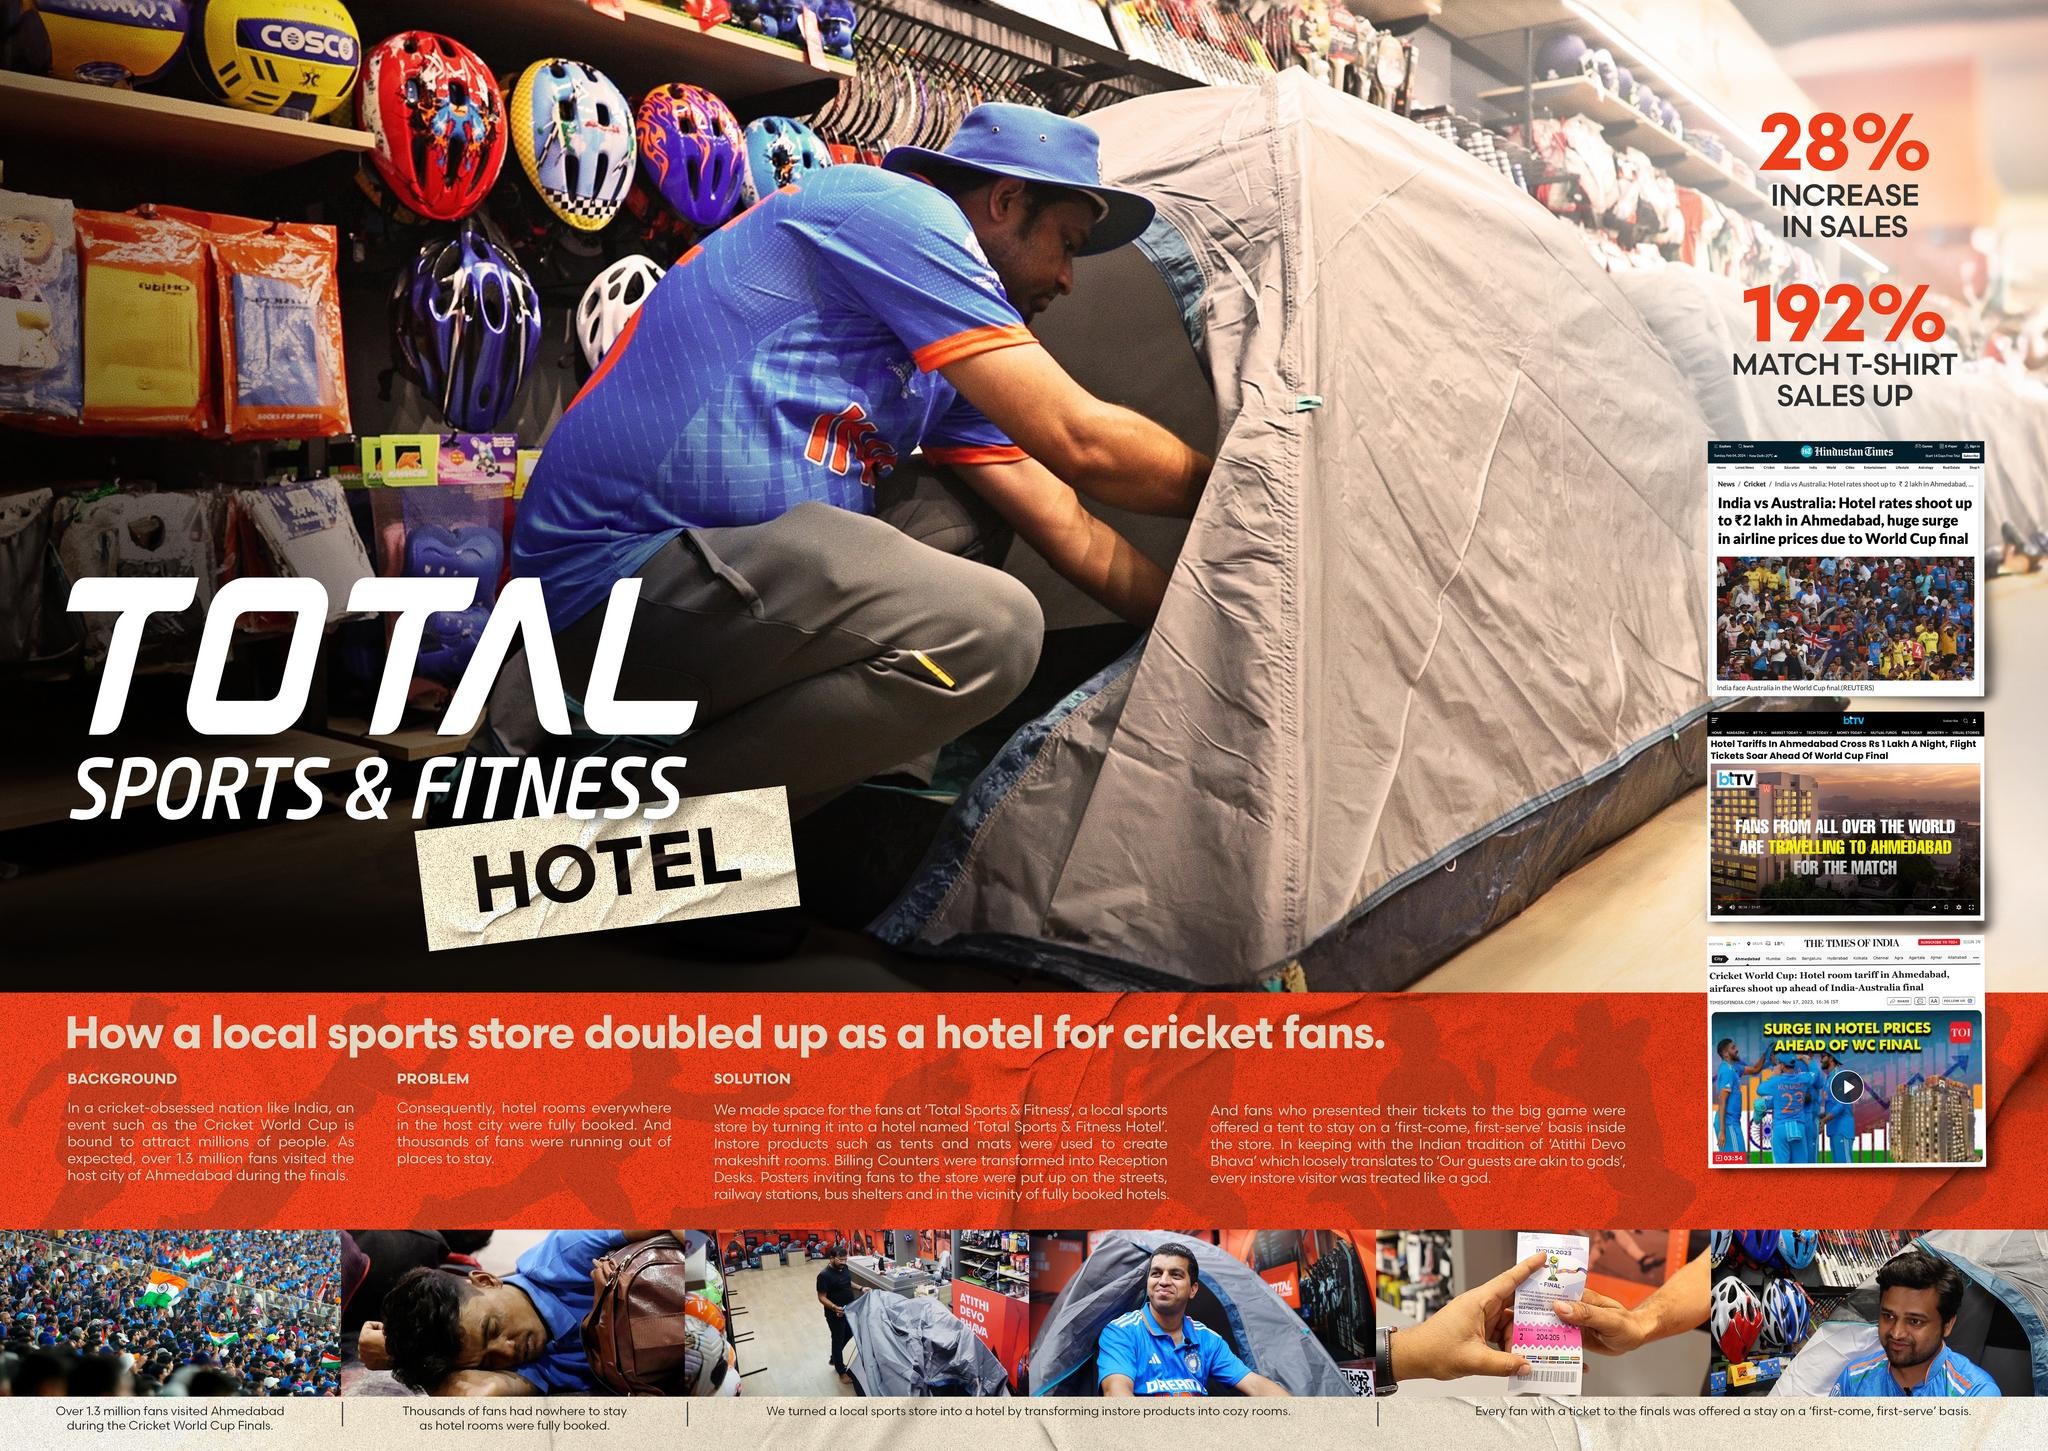 TOTAL SPORTS AND FITNESS HOTEL